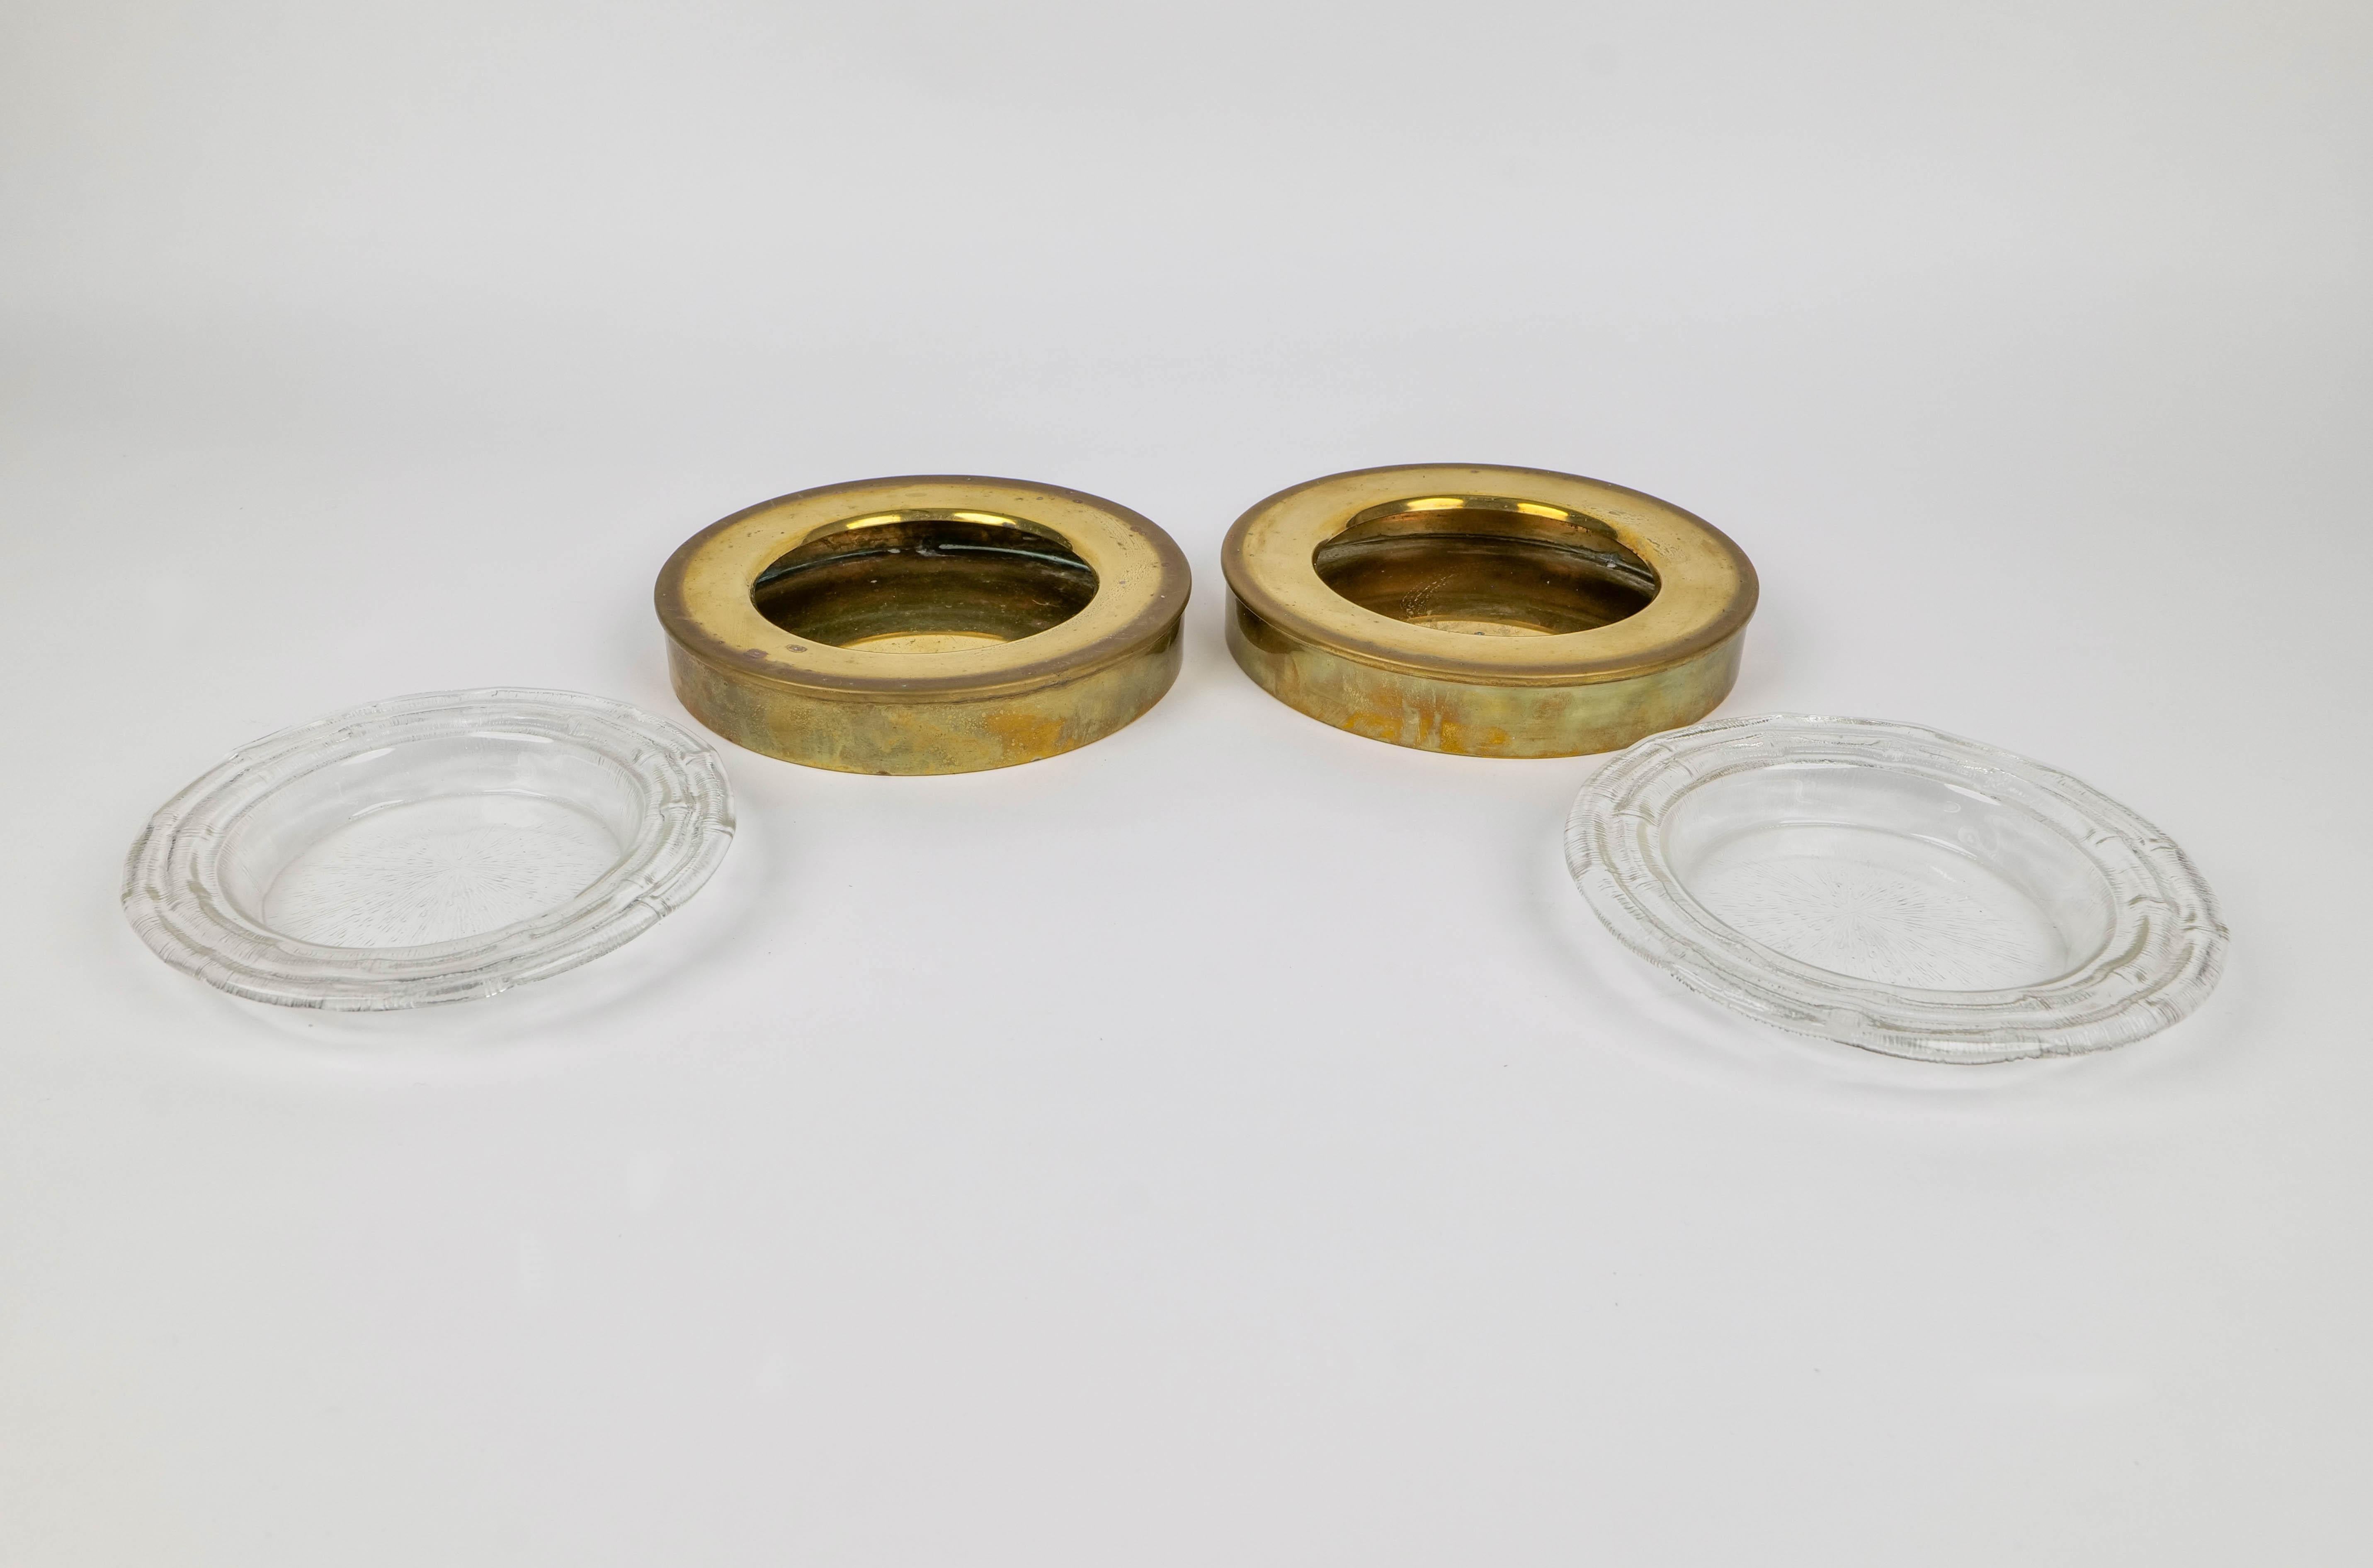 Metal Pair of Round Vide Pocket Emptier Bowls in Brass and Murano Glass, Italy, 1970s For Sale